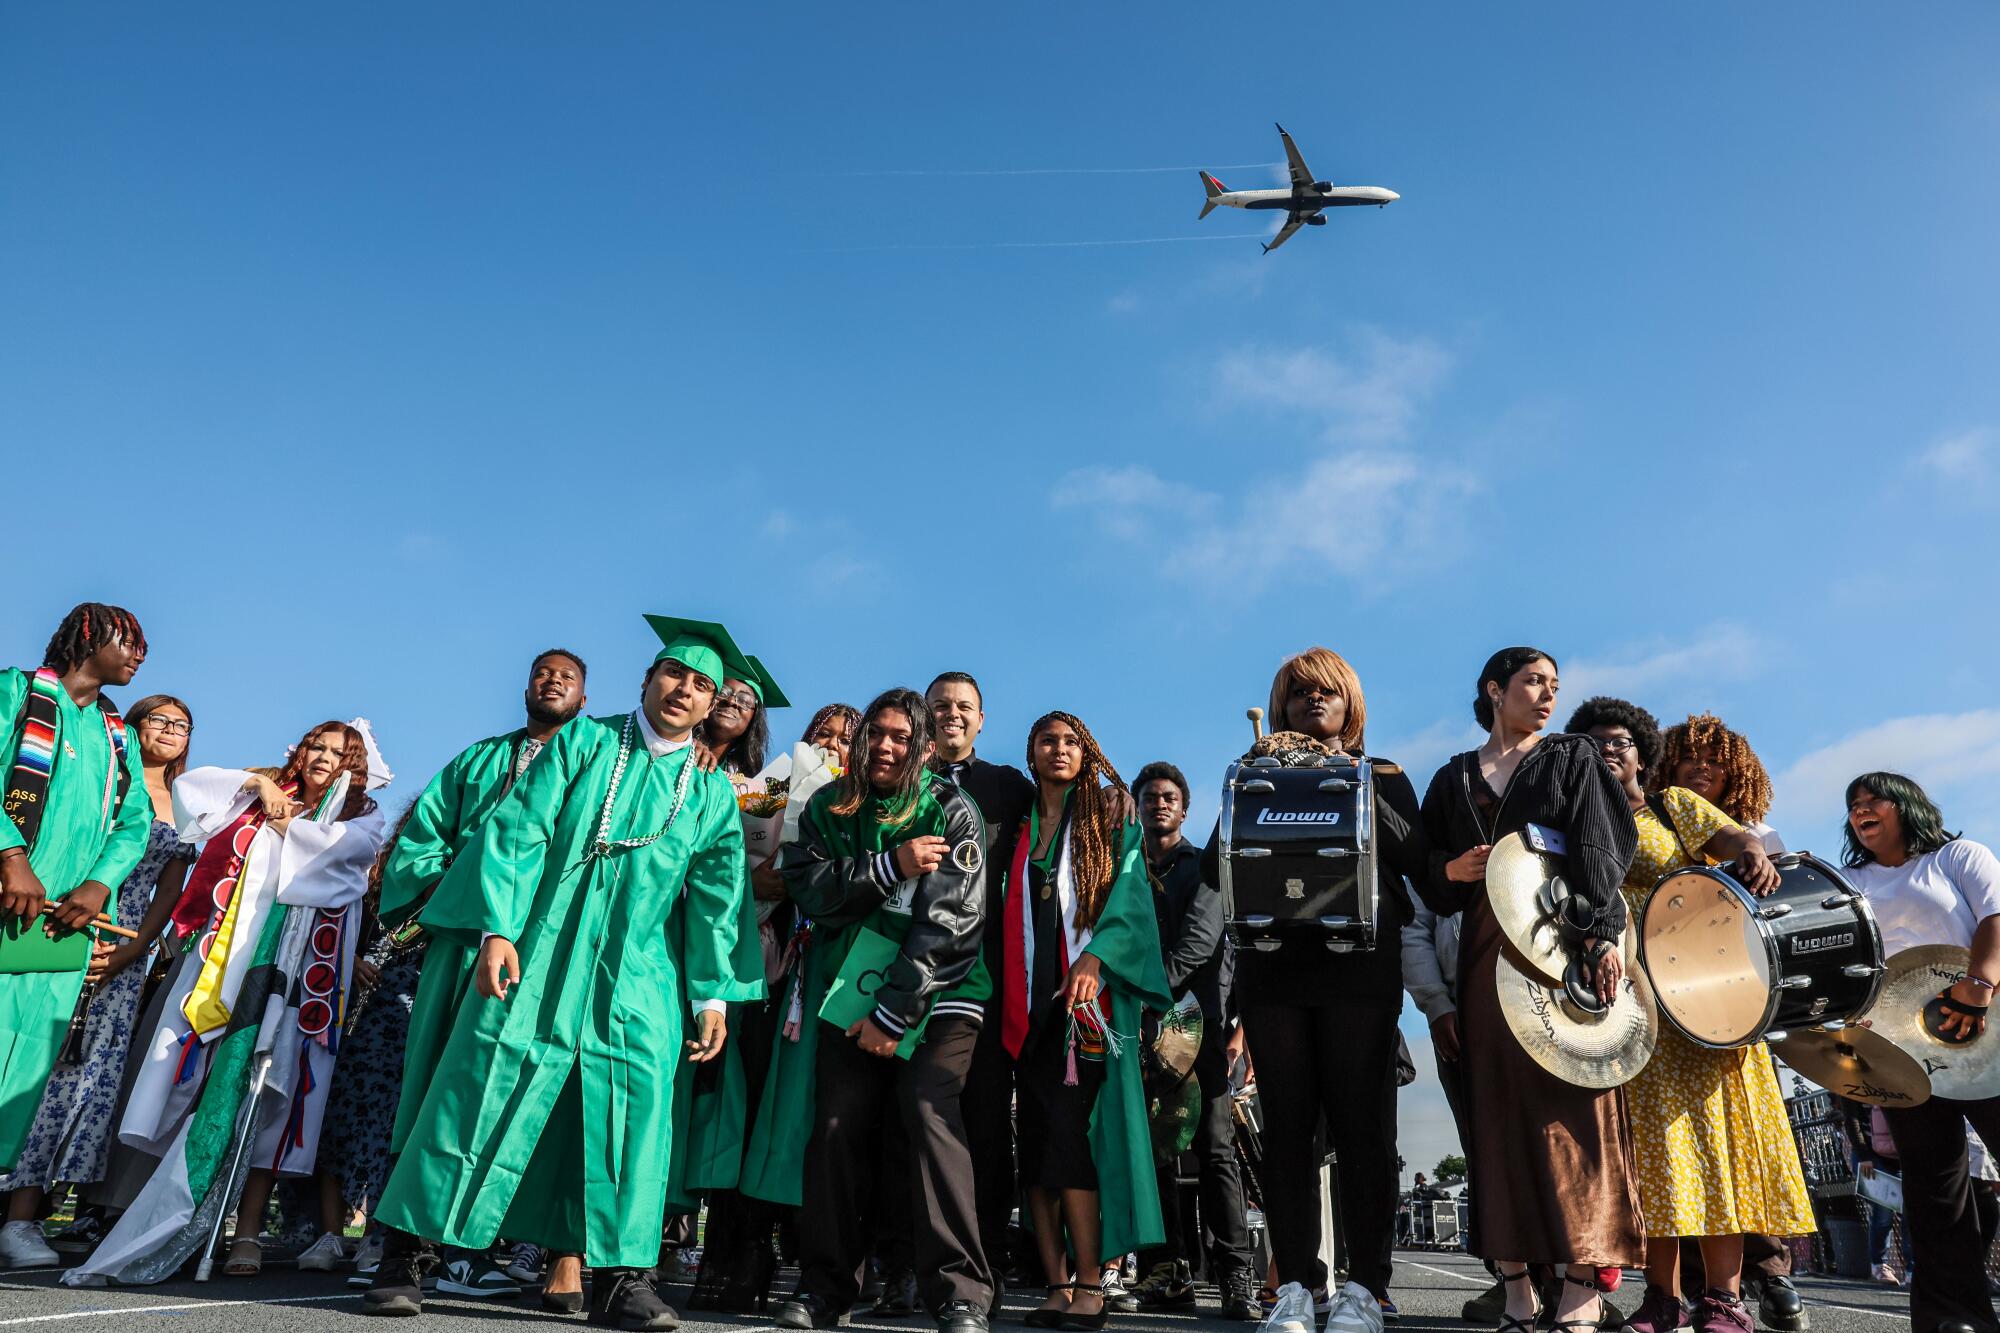 Young people, some in green robes, stand in a group outdoors.